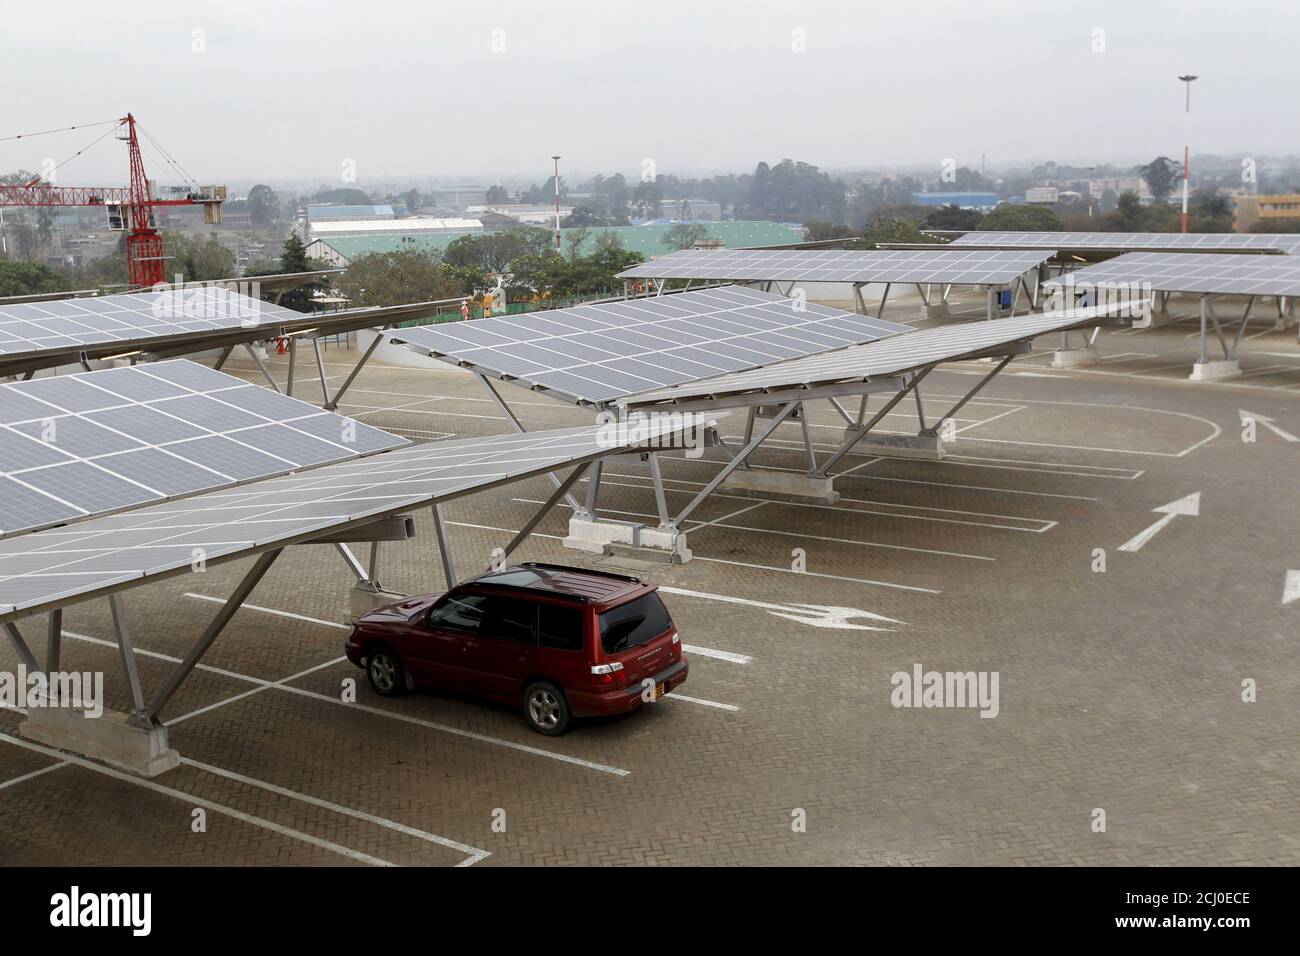 A car is seen parked under solar panels at a solar carport at the Garden City shopping mall in Kenya's capital Nairobi, September 15, 2015. The Africa's largest solar carport with 3,300 solar panels will generate 1256 MWh annually and cut carbon emission by around 745 tonnes per year, according to Solarcentury and Solar Africa.  REUTERS/Thomas Mukoya Stock Photo